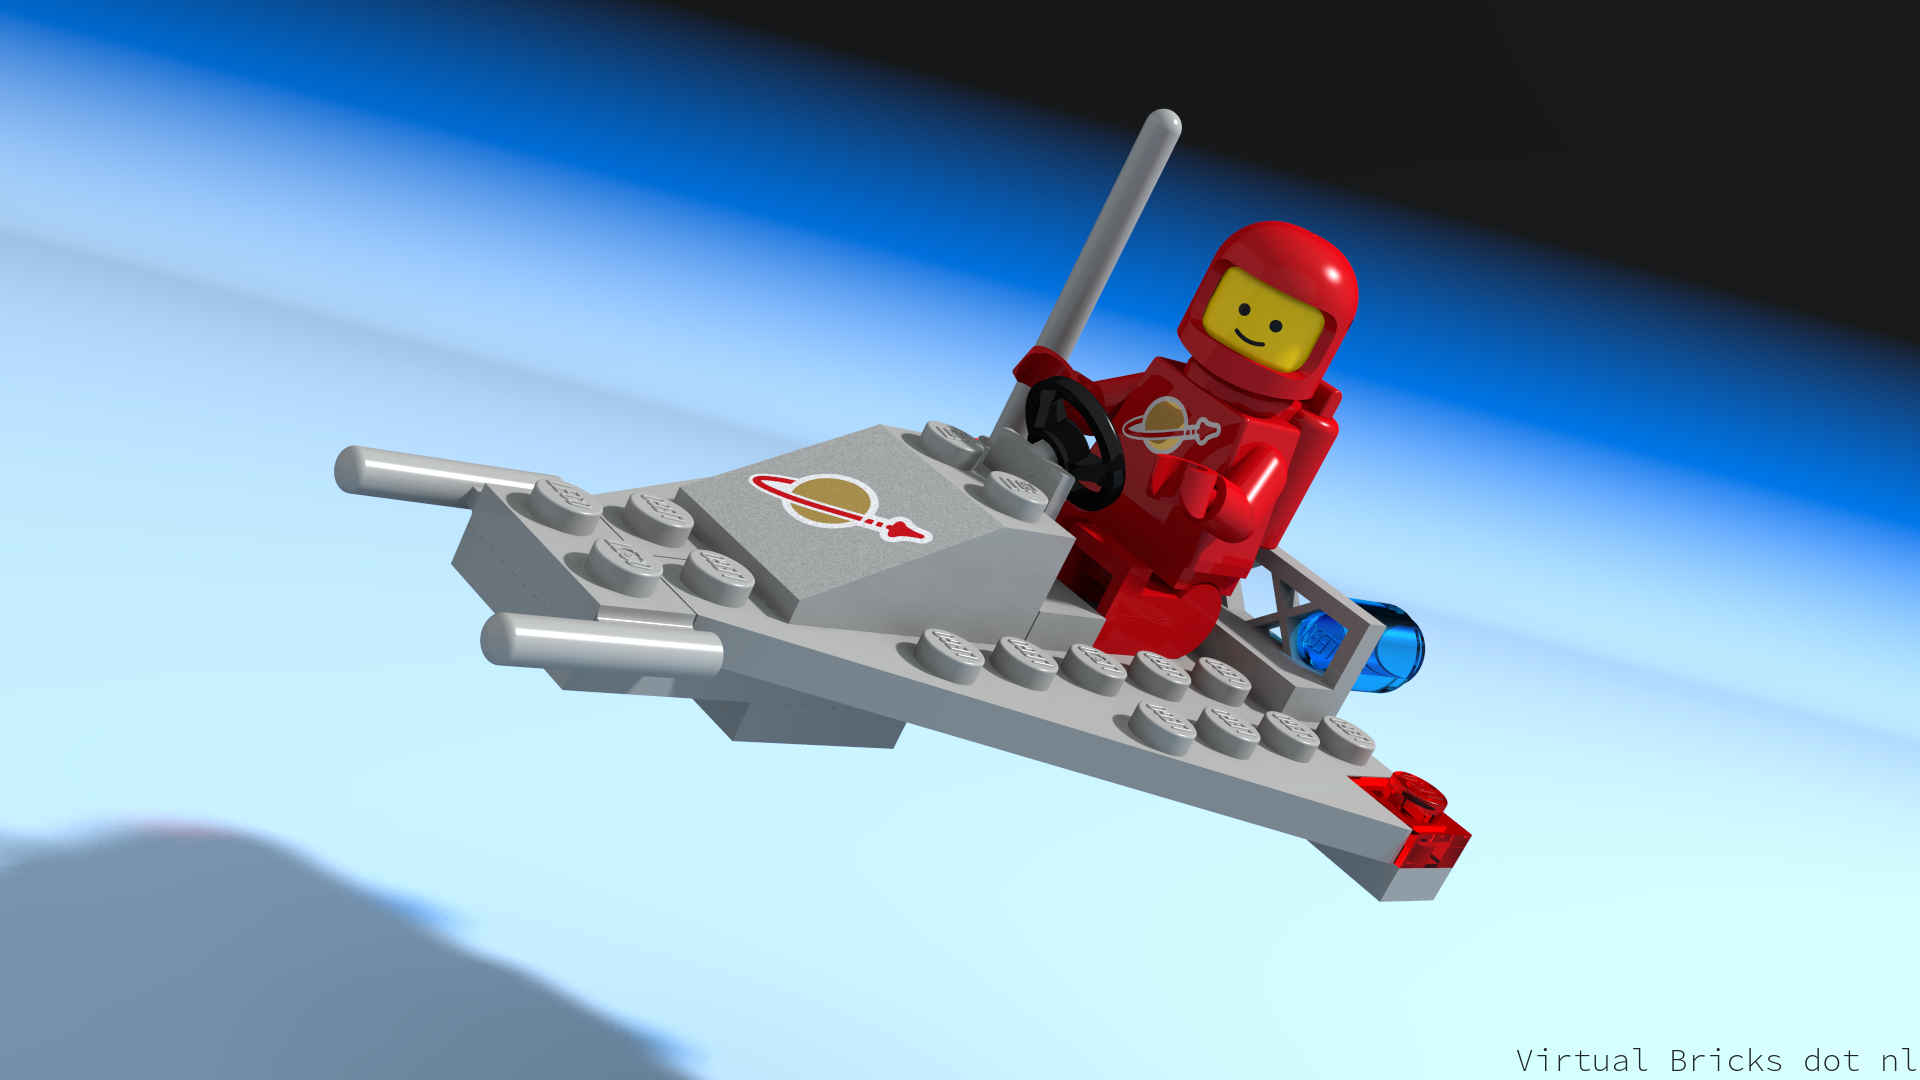 One of the first LEGO Classic Space models